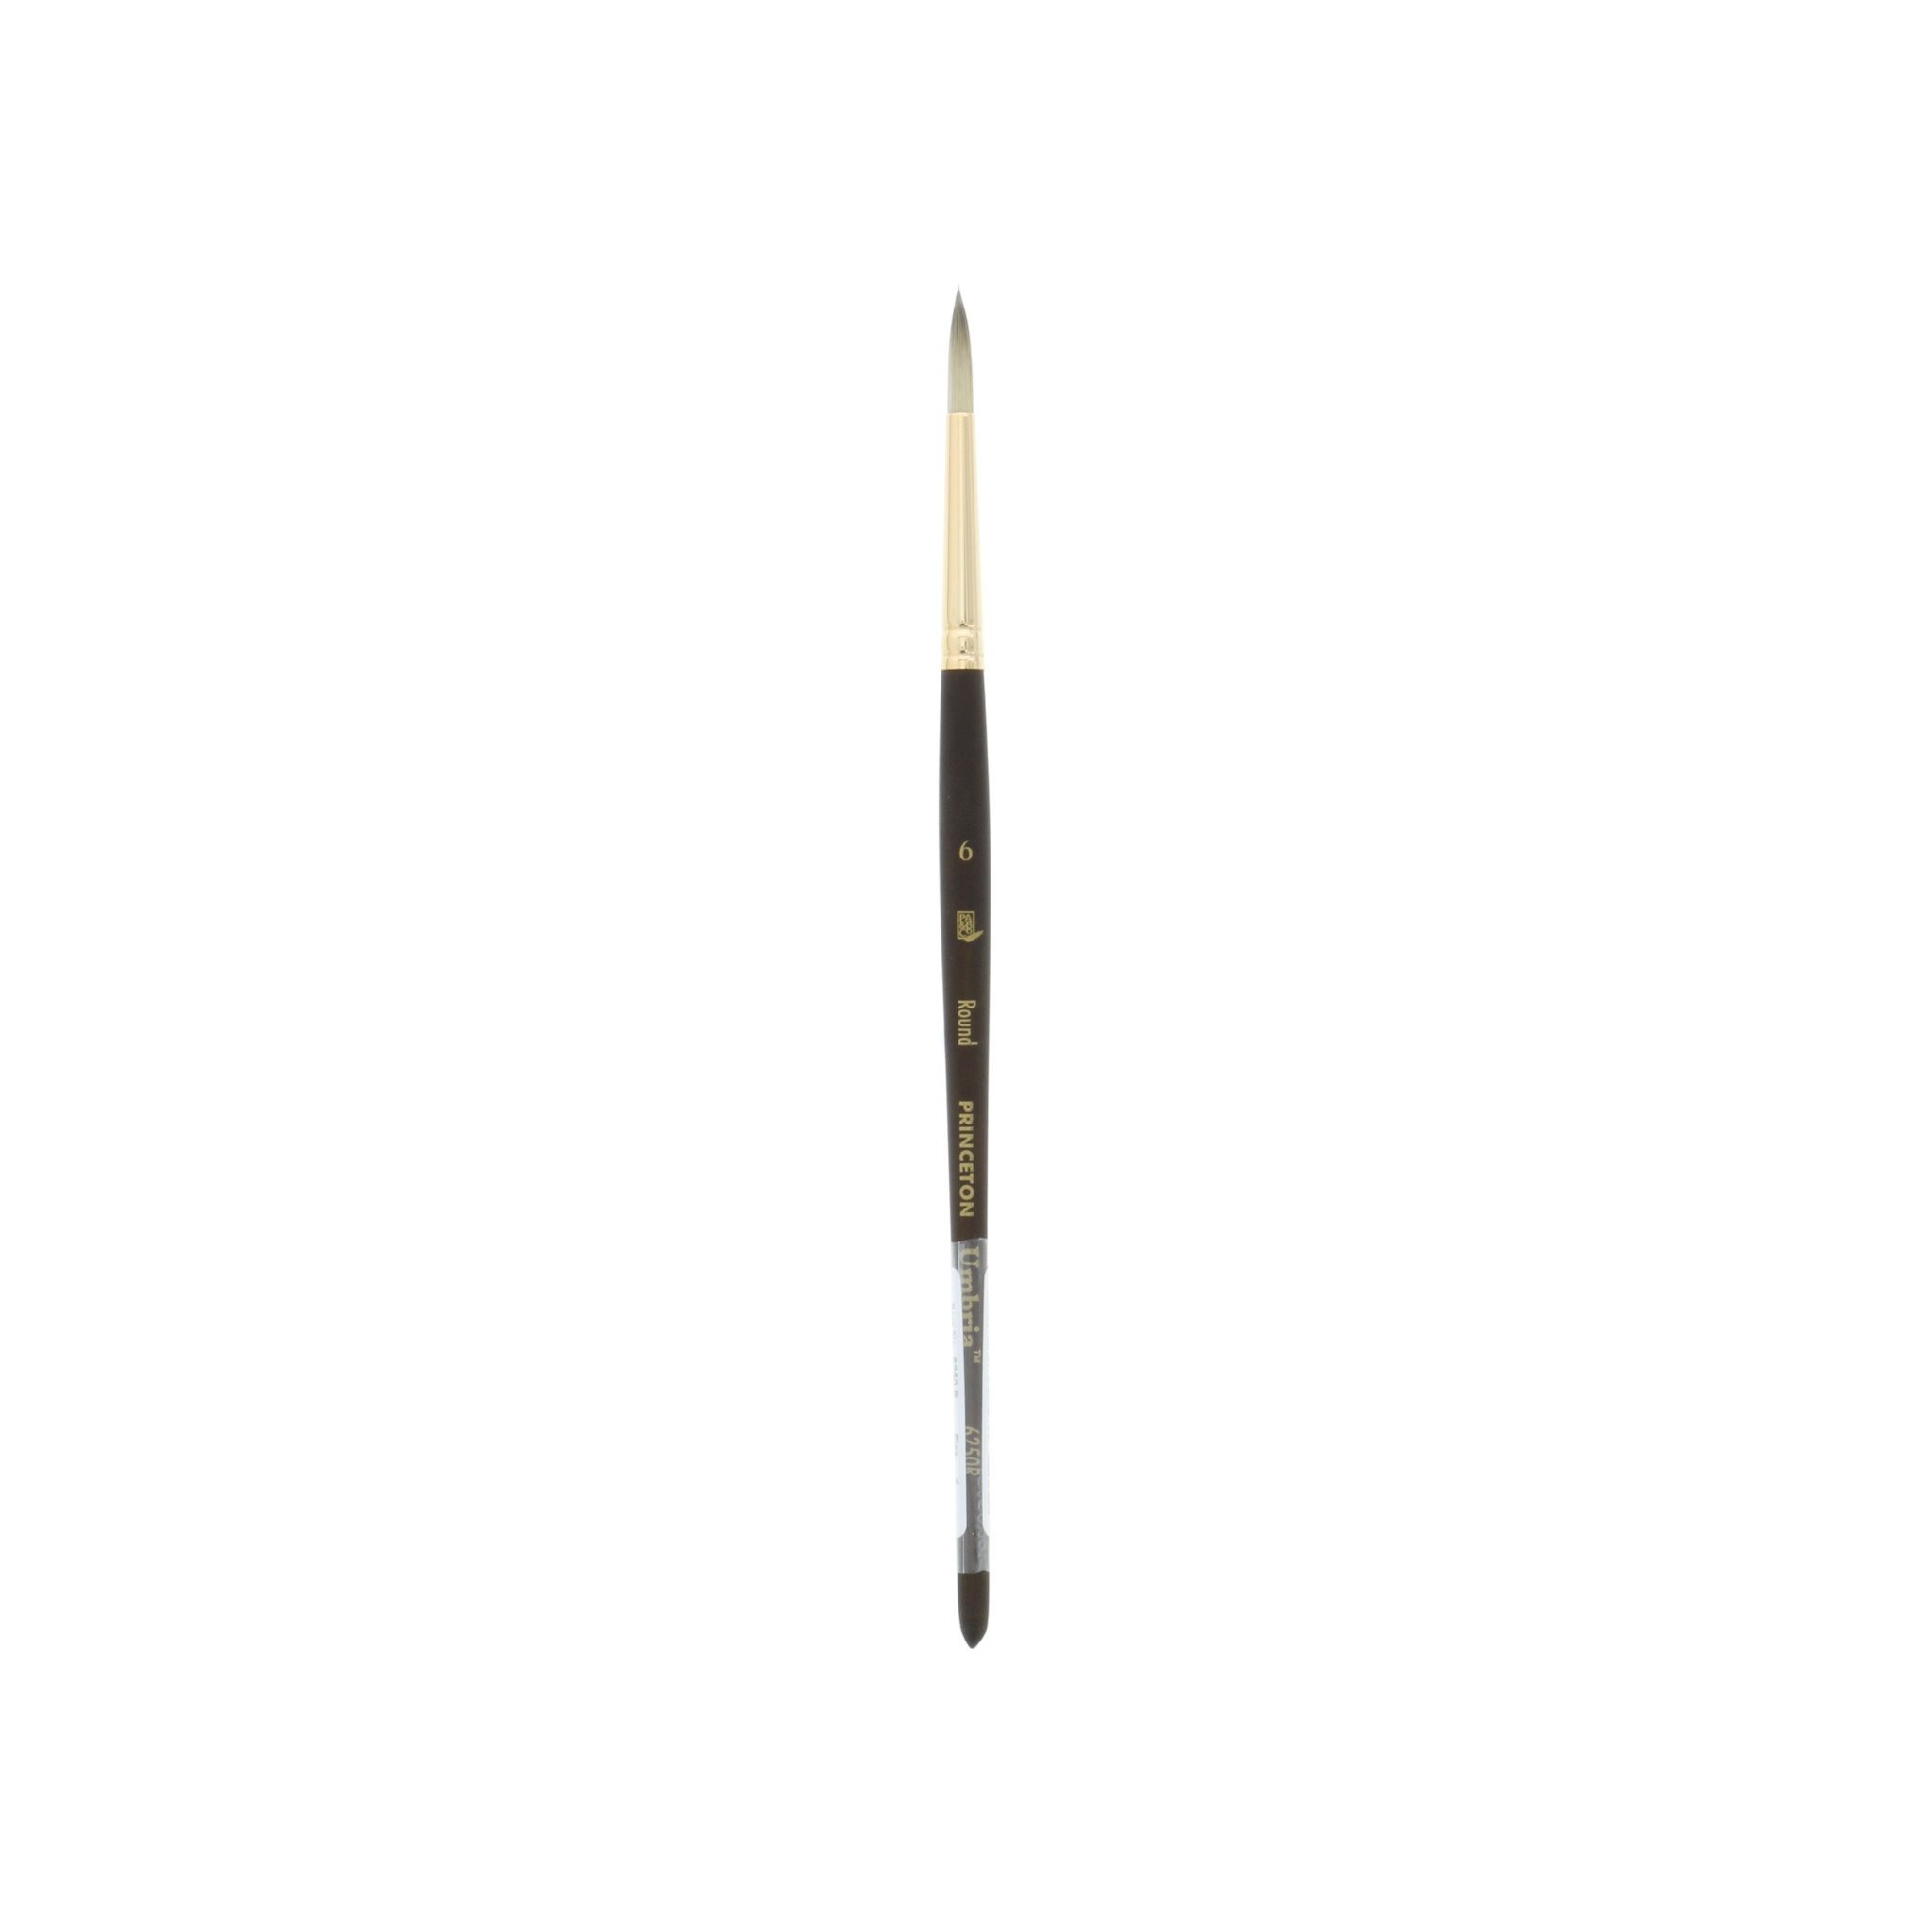 Princeton Umbria Short Handle Synthetic Paint Brush for Watercolor, Acrylic  and Oil, Series 6250, Filbert, 8